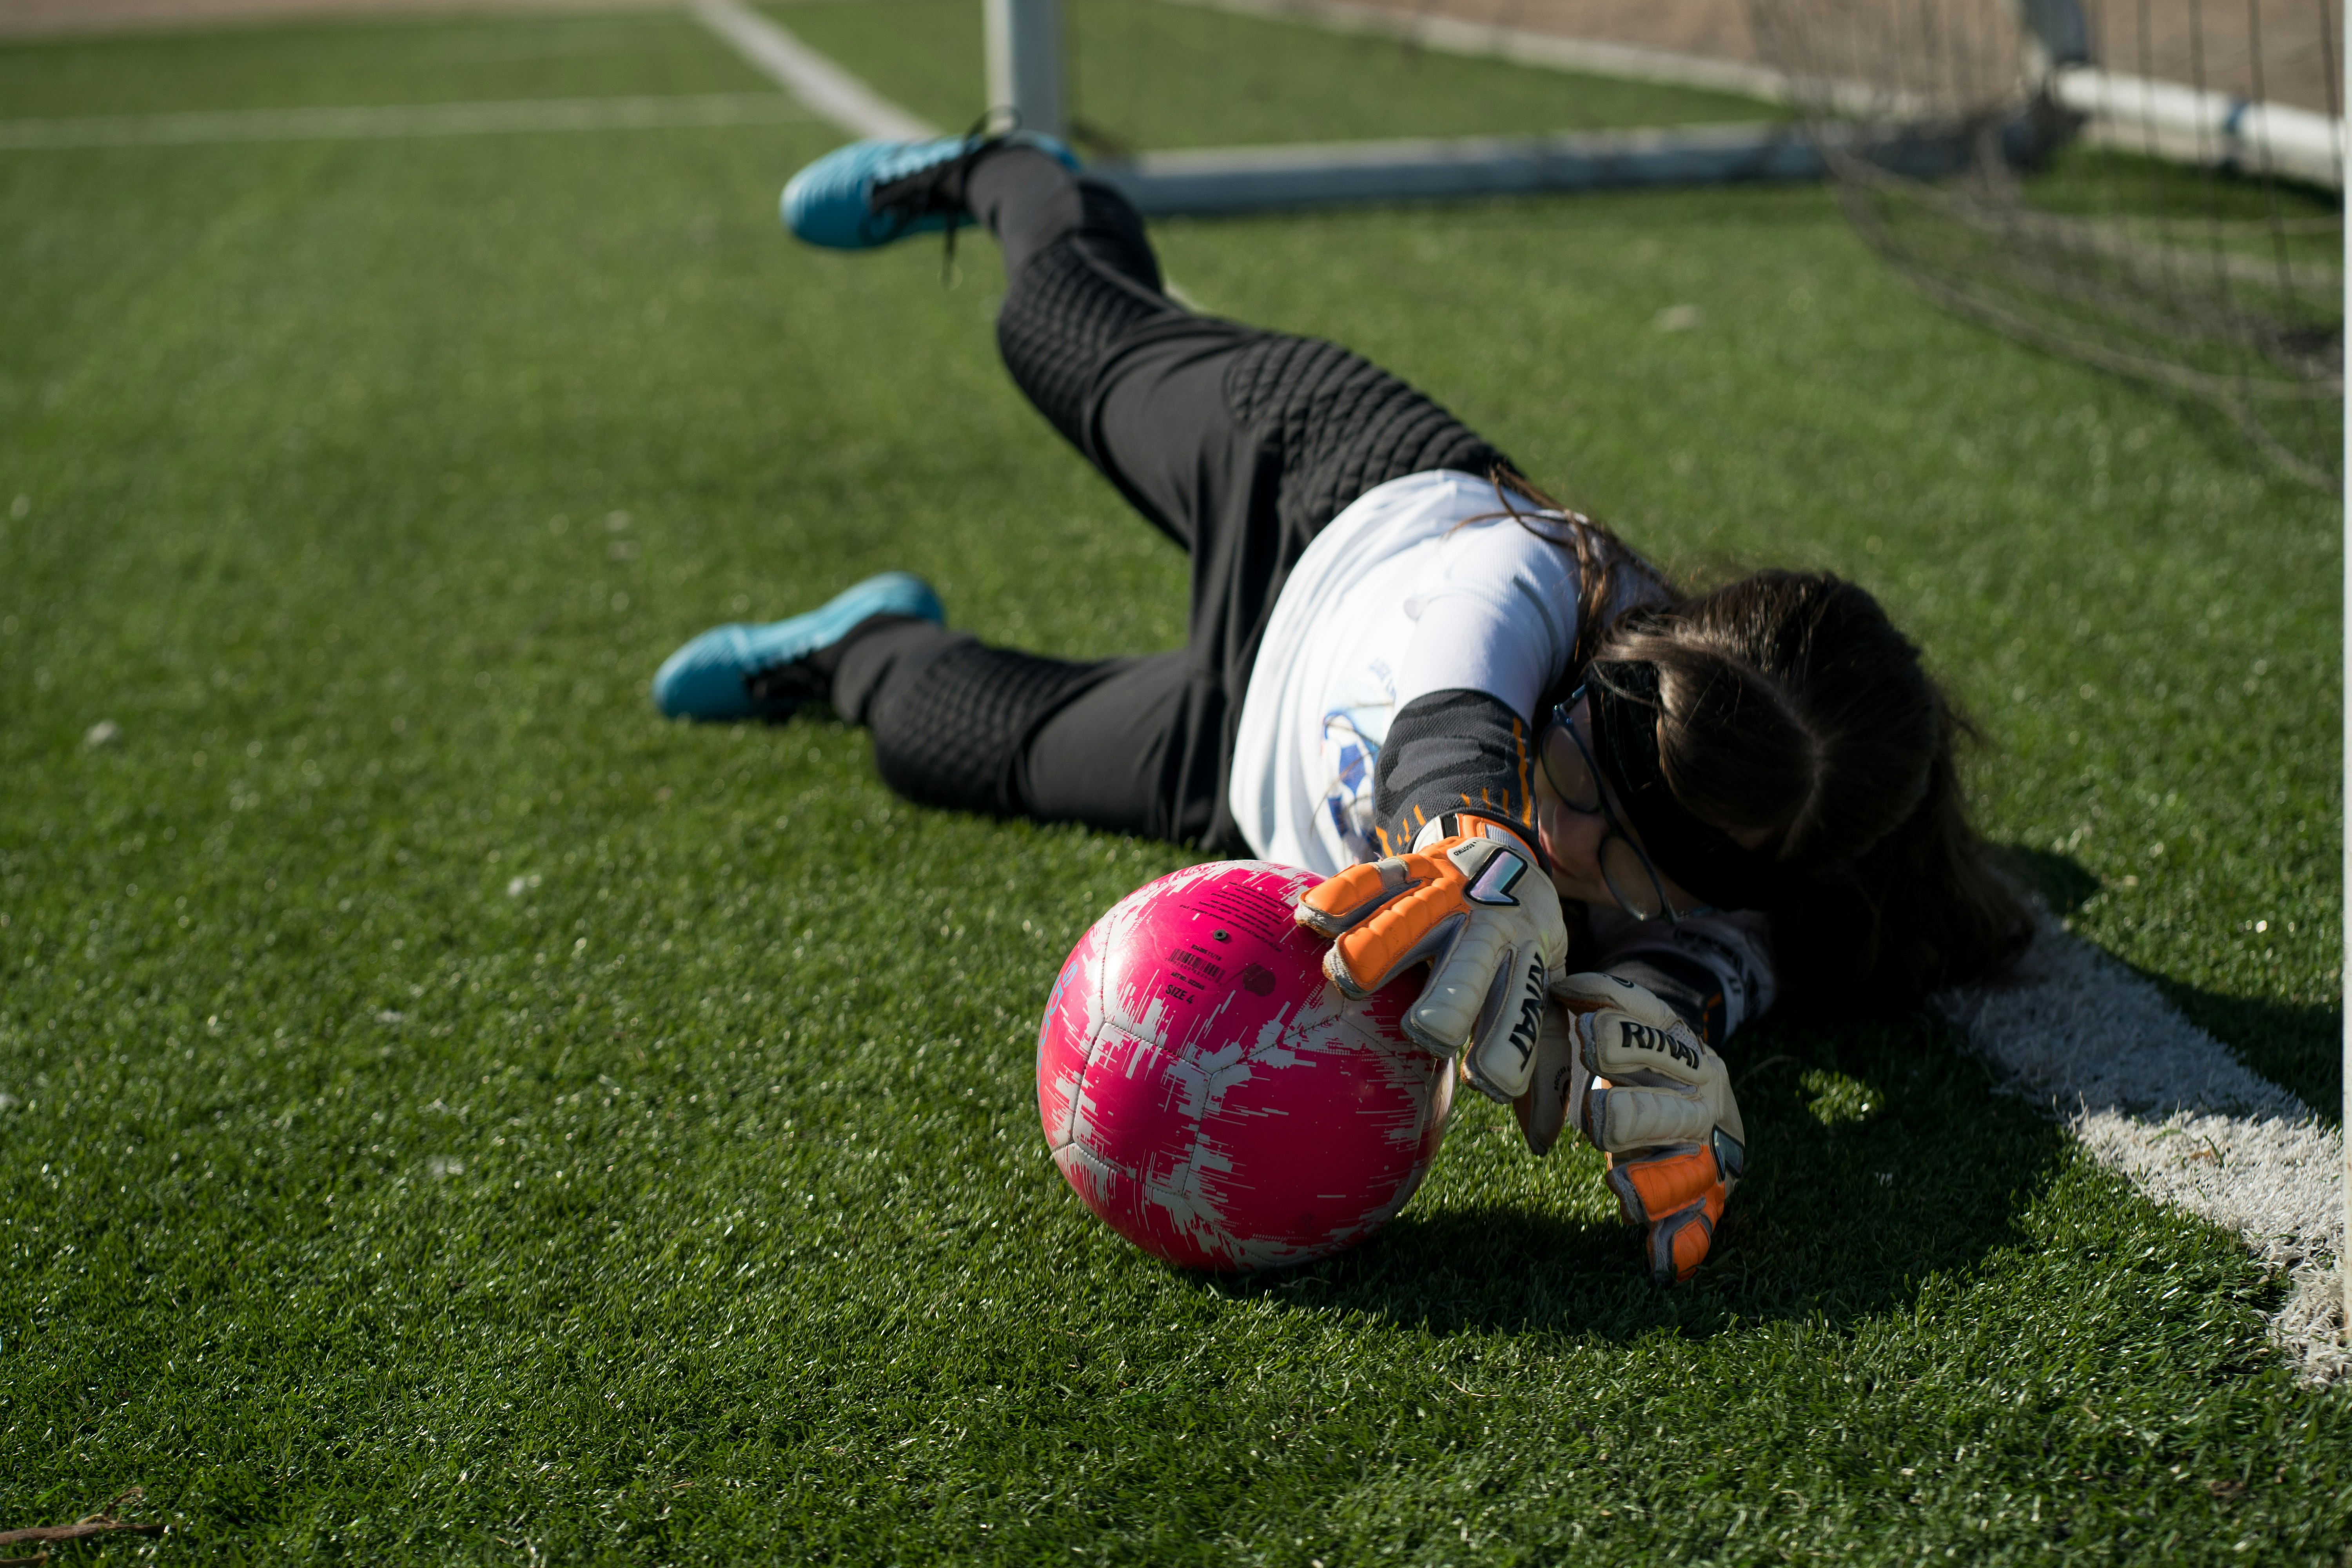 woman in white long sleeve shirt and black pants playing soccer on green grass field during